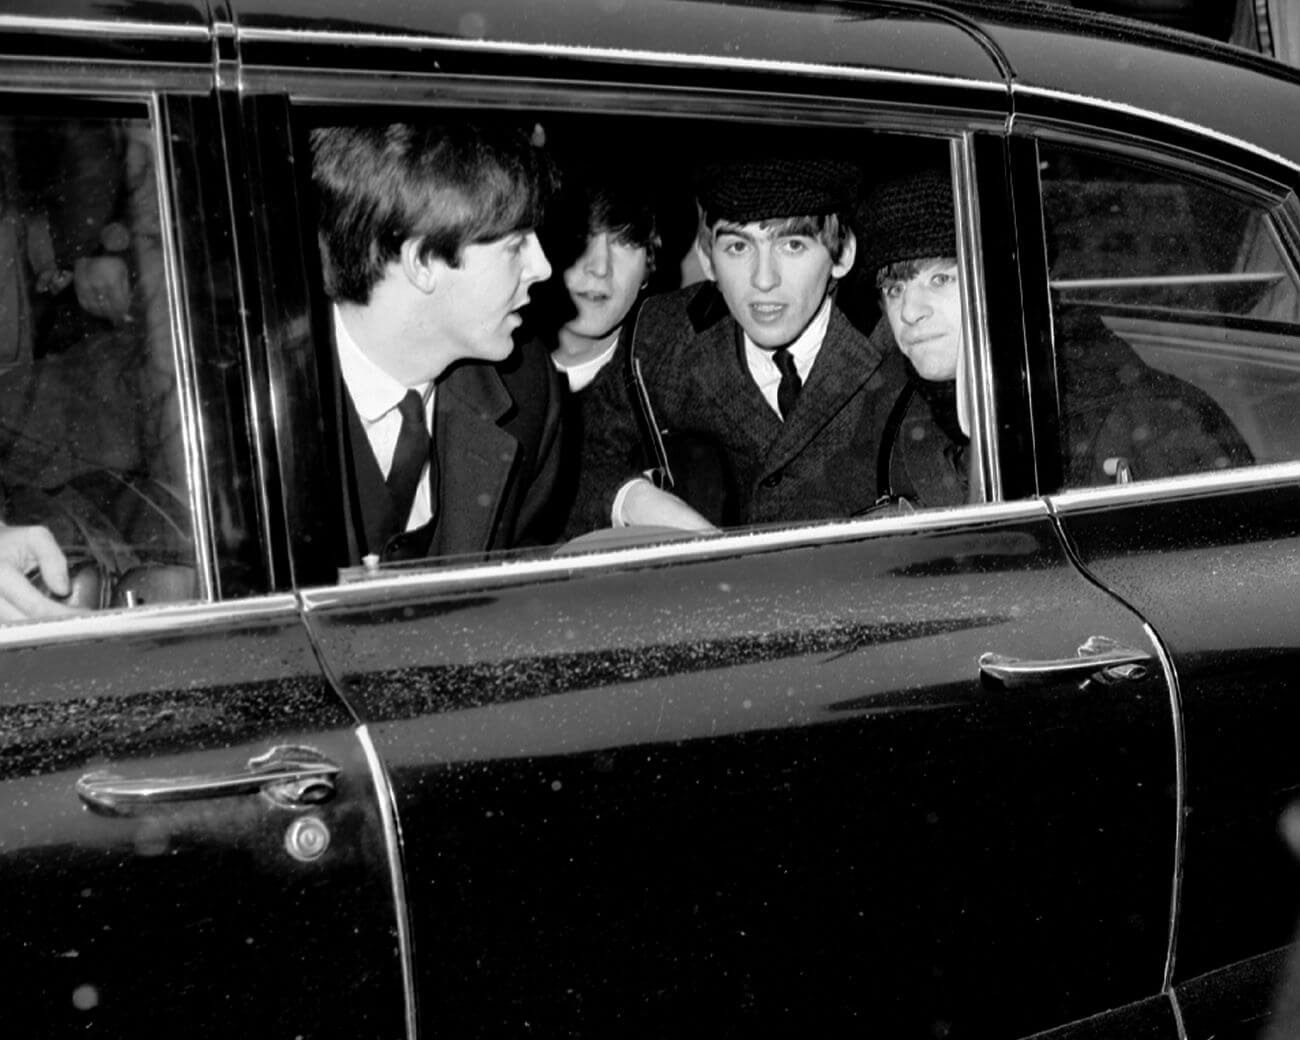 A black and white picture of Paul McCartney, John Lennon, George Harrison, and Ringo Starr of The Beatles sitting in the backseat of a car.